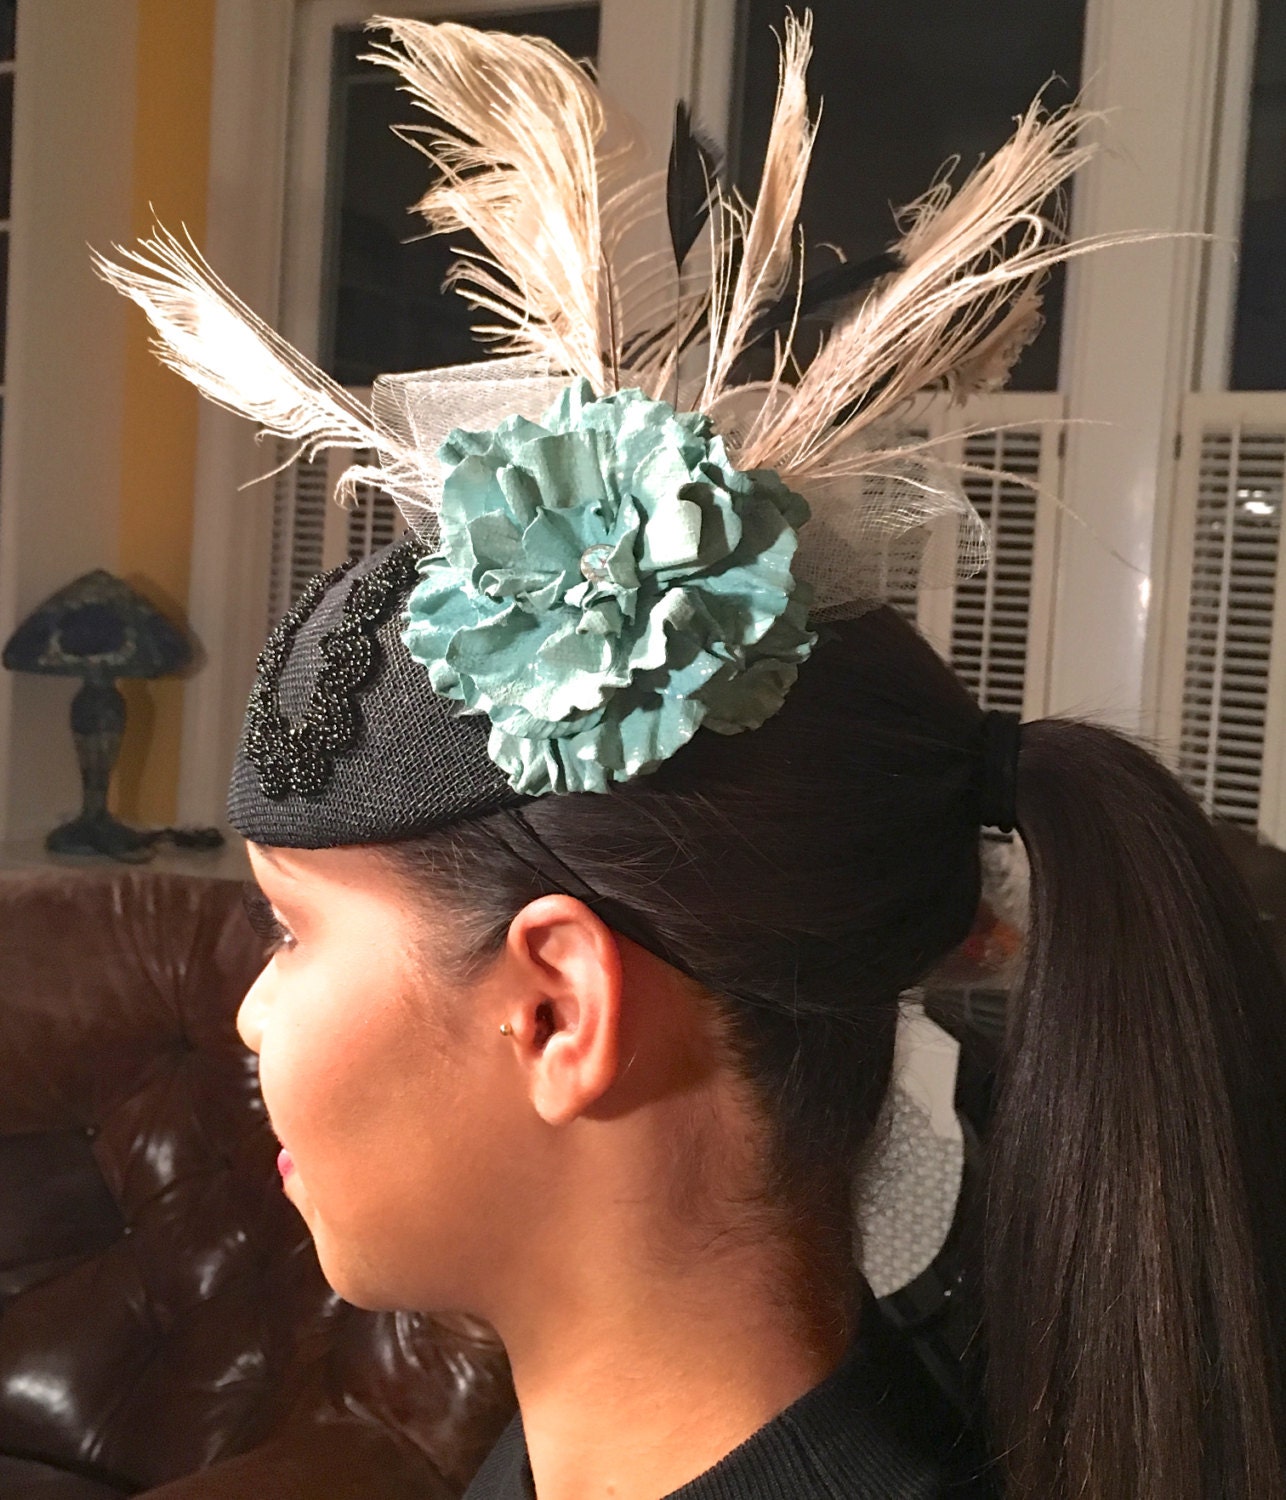 Black Sinamay with Turquoise Leather flower-ostrich feathers-crinoline-Vintage beaded trim-Ascot Races Hat-Polo Matches-Wedding-Church-Party